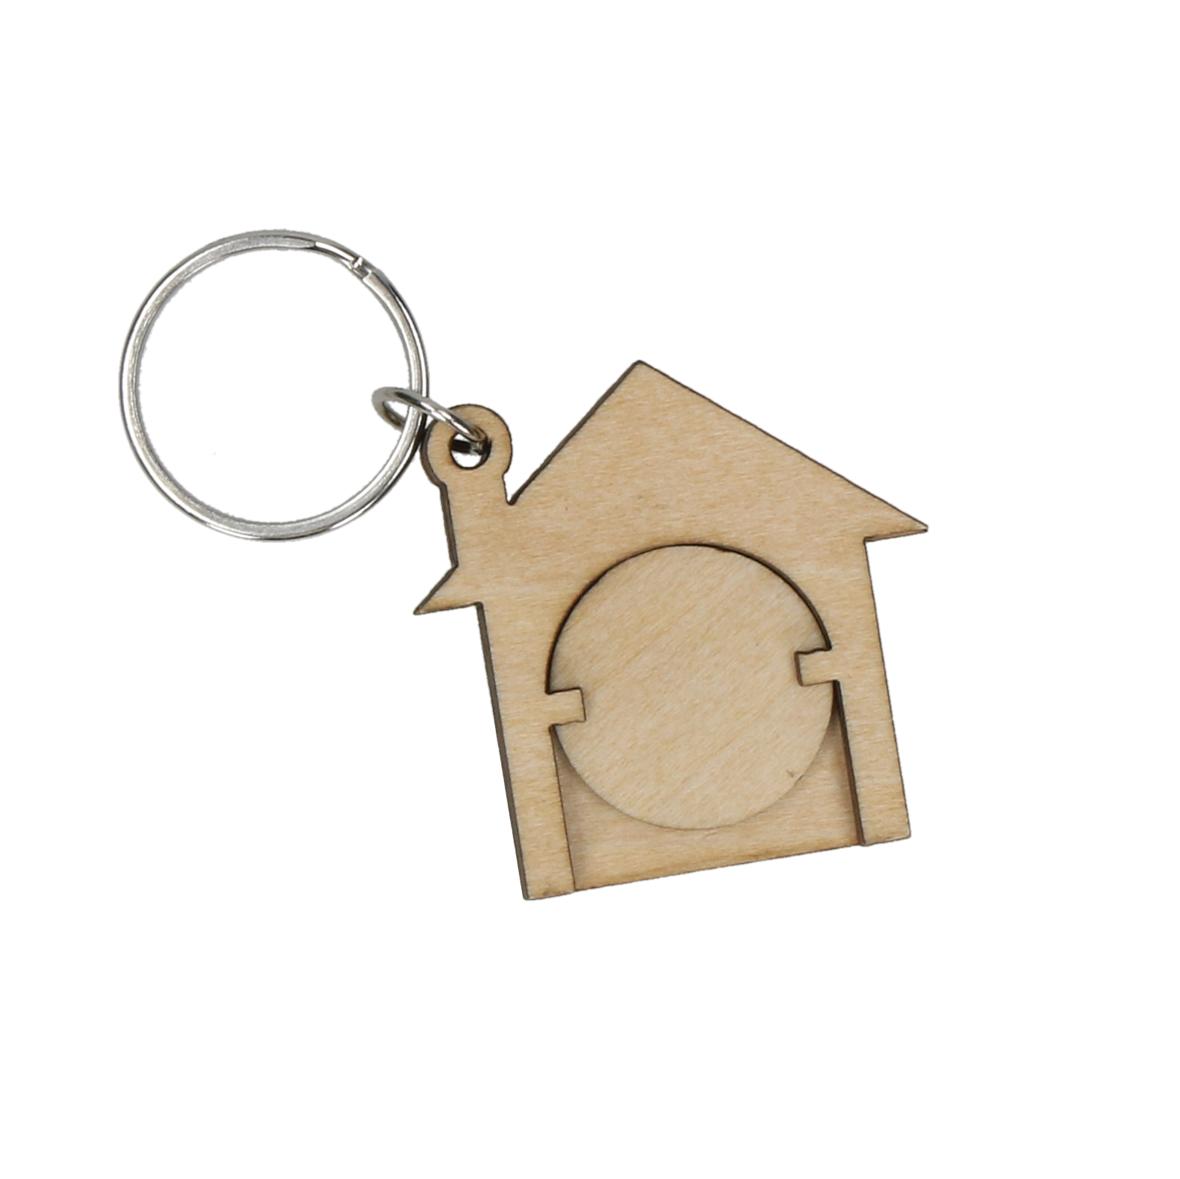 Keyring in the shape of a house made of plywood chips, with a coin for a shopping trolley - Elham